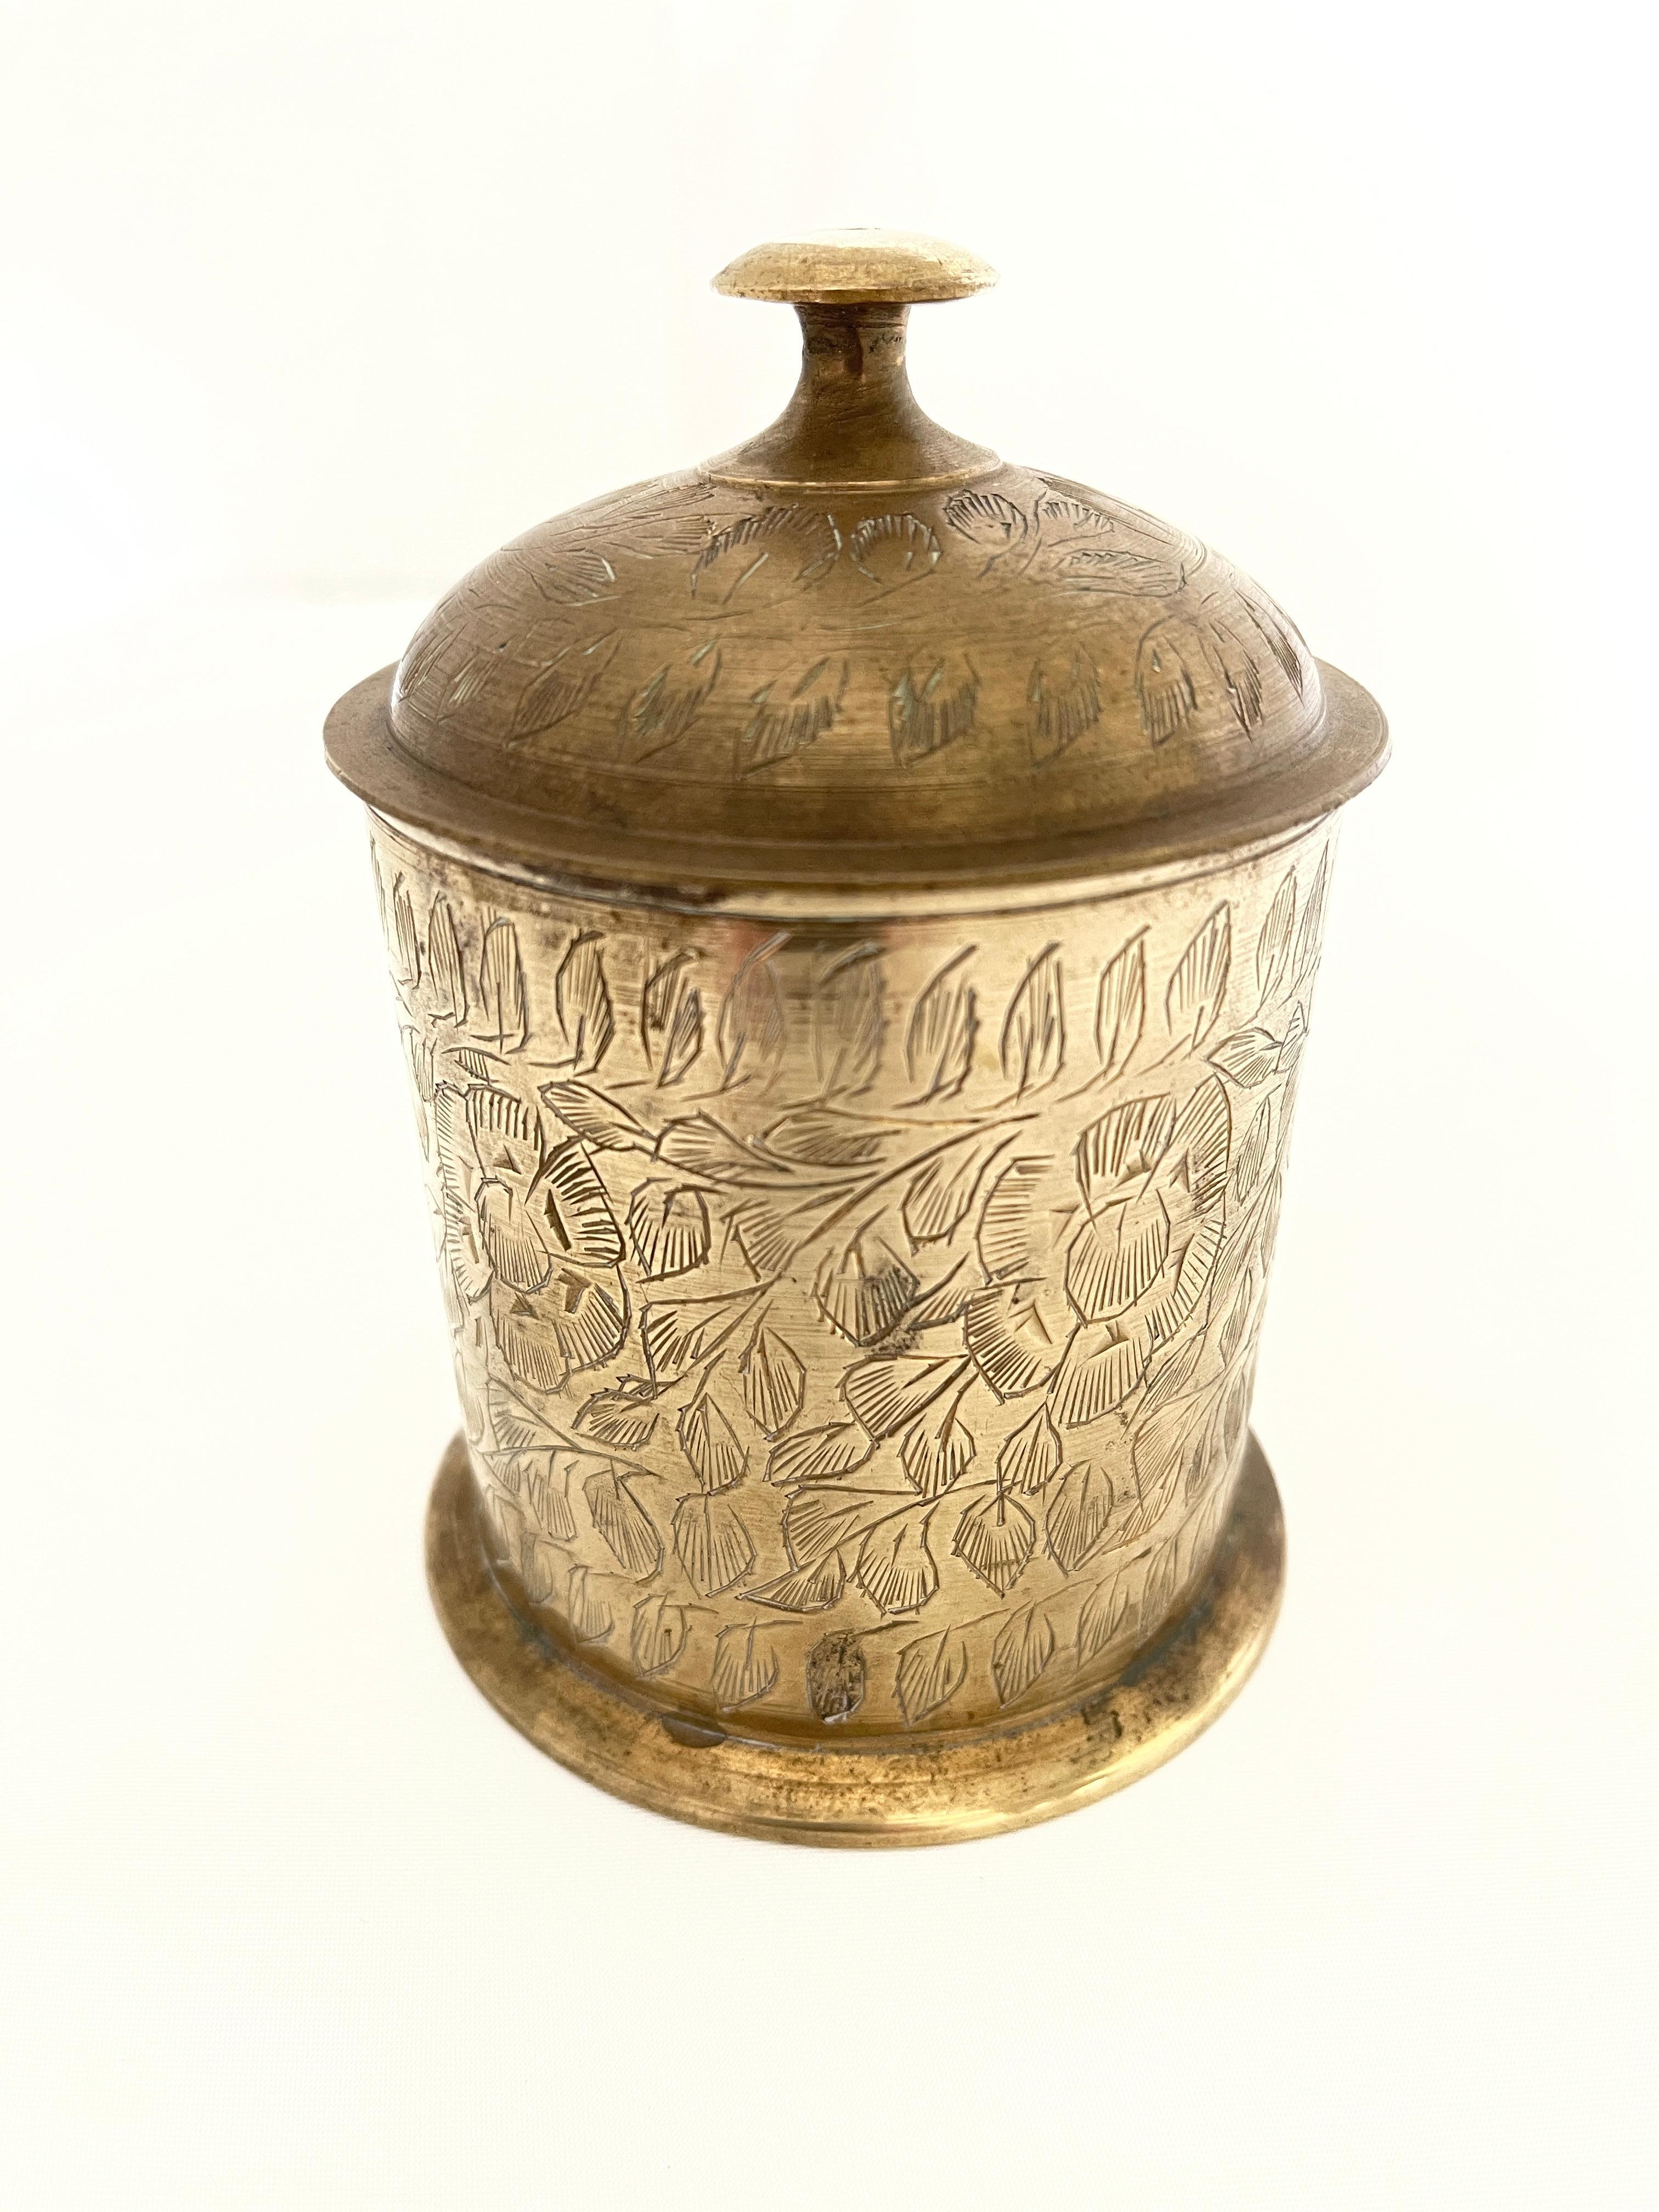 Indian brass lidded cigarette holder / trinket box, with hand engraved Mughal floral designs all around. Completely hand wrought piece with exquisite detail. Hand crafted in India, c. 1960's.